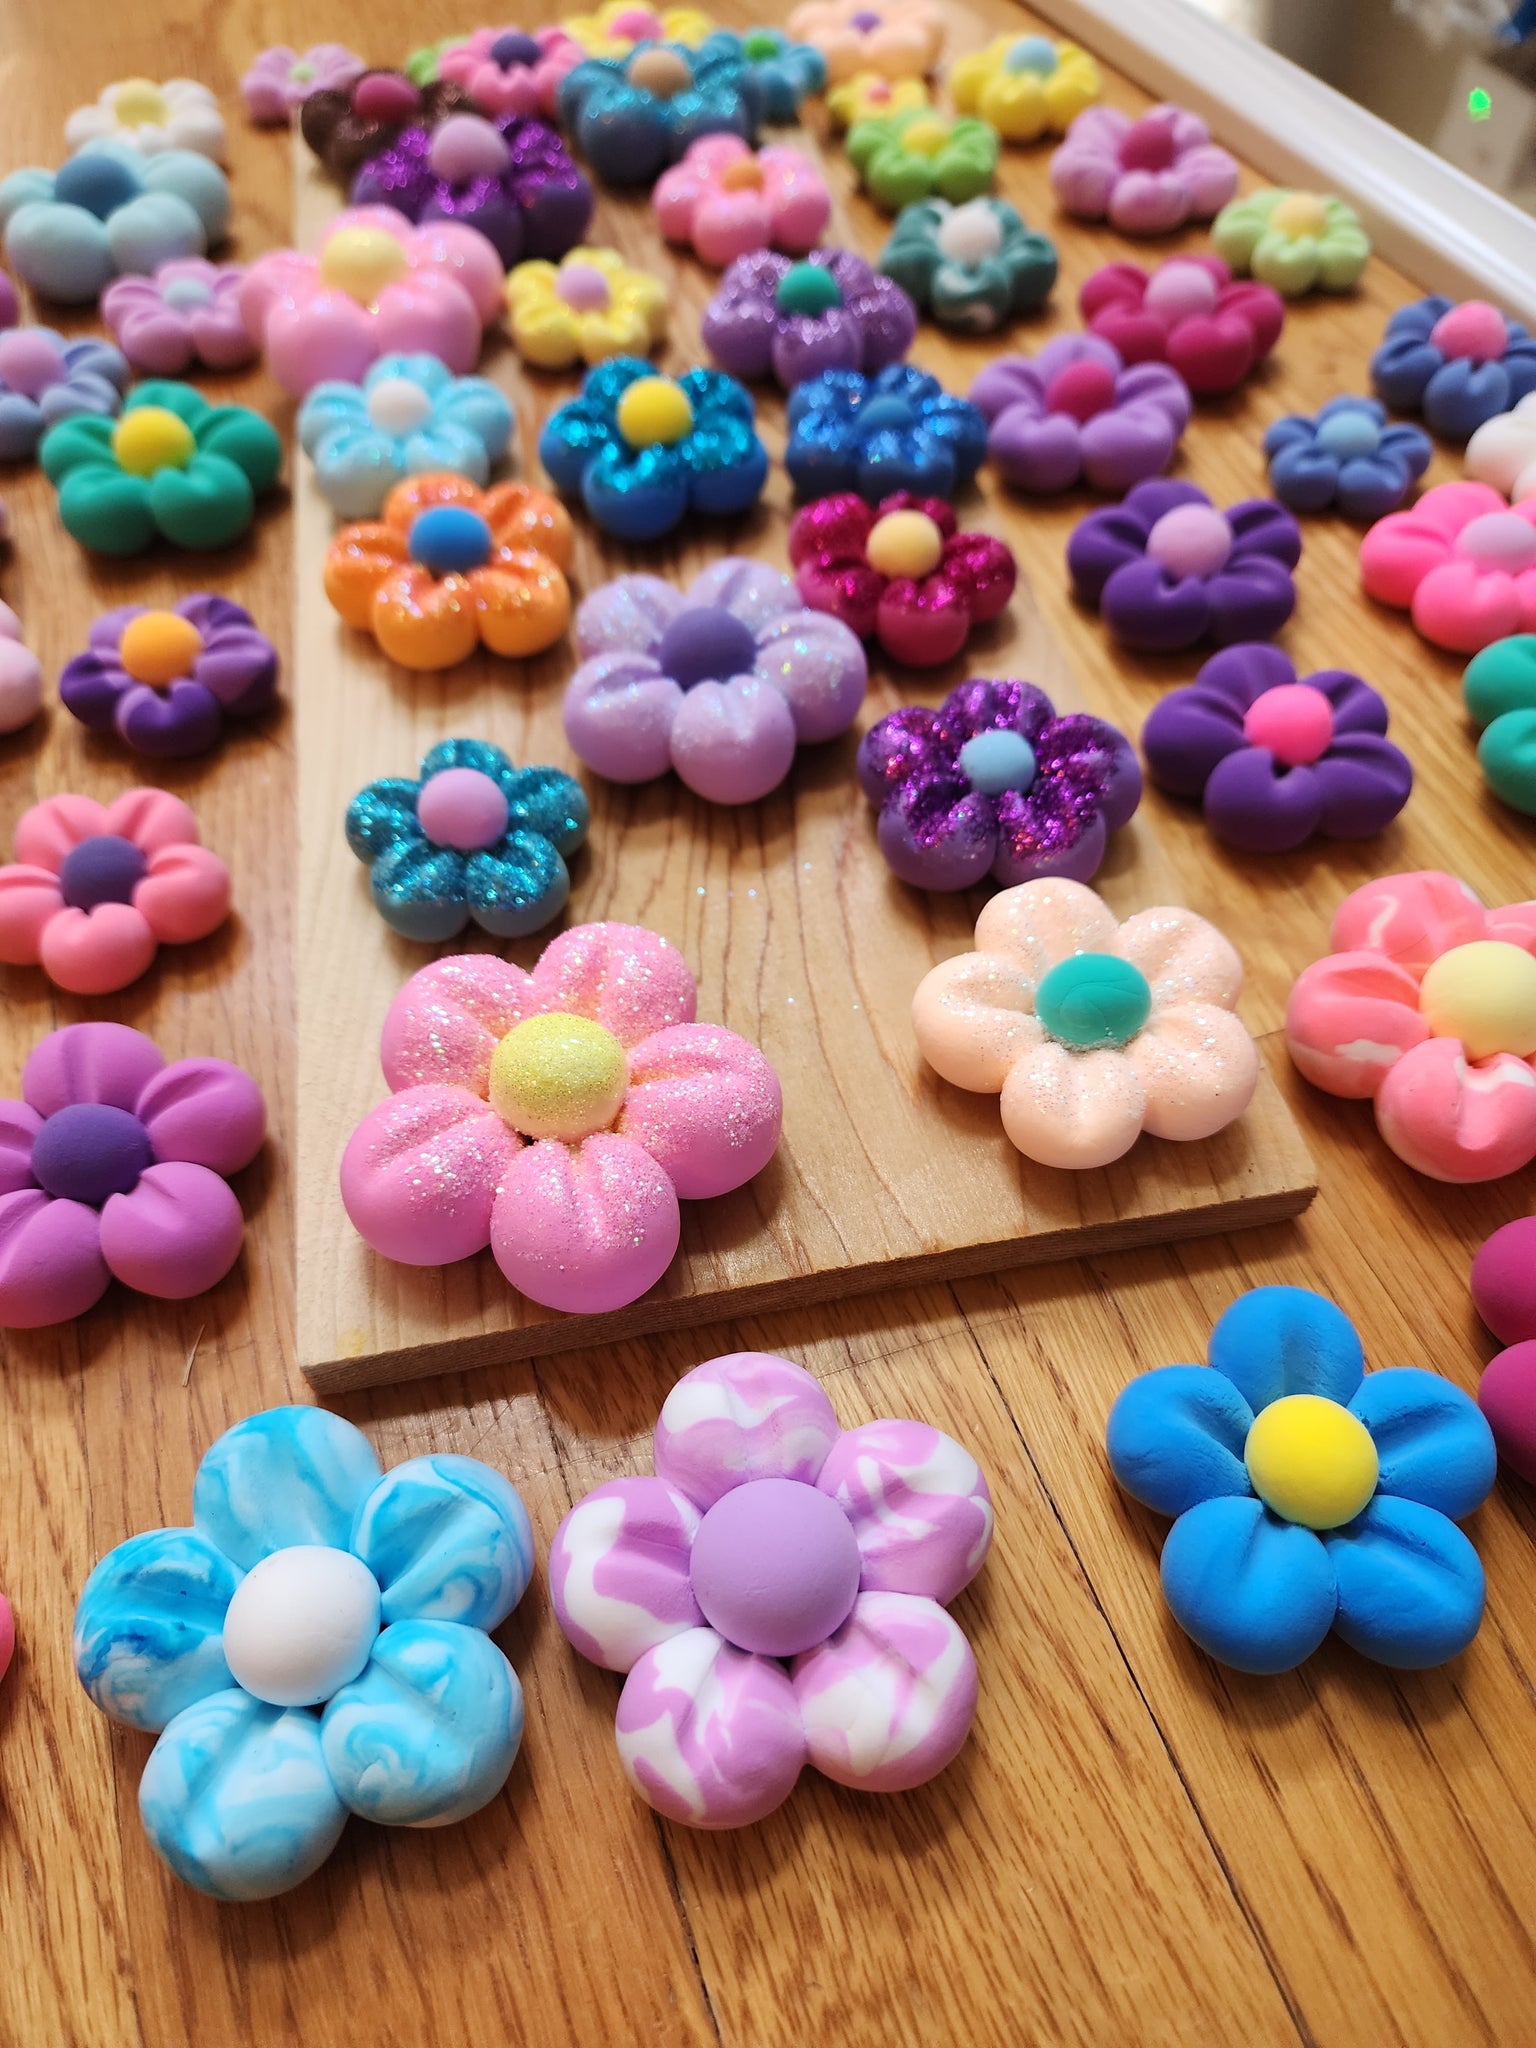 JUST FLOWERS Handmade Clay Flowers for Mirrors, Vanity, Canvas